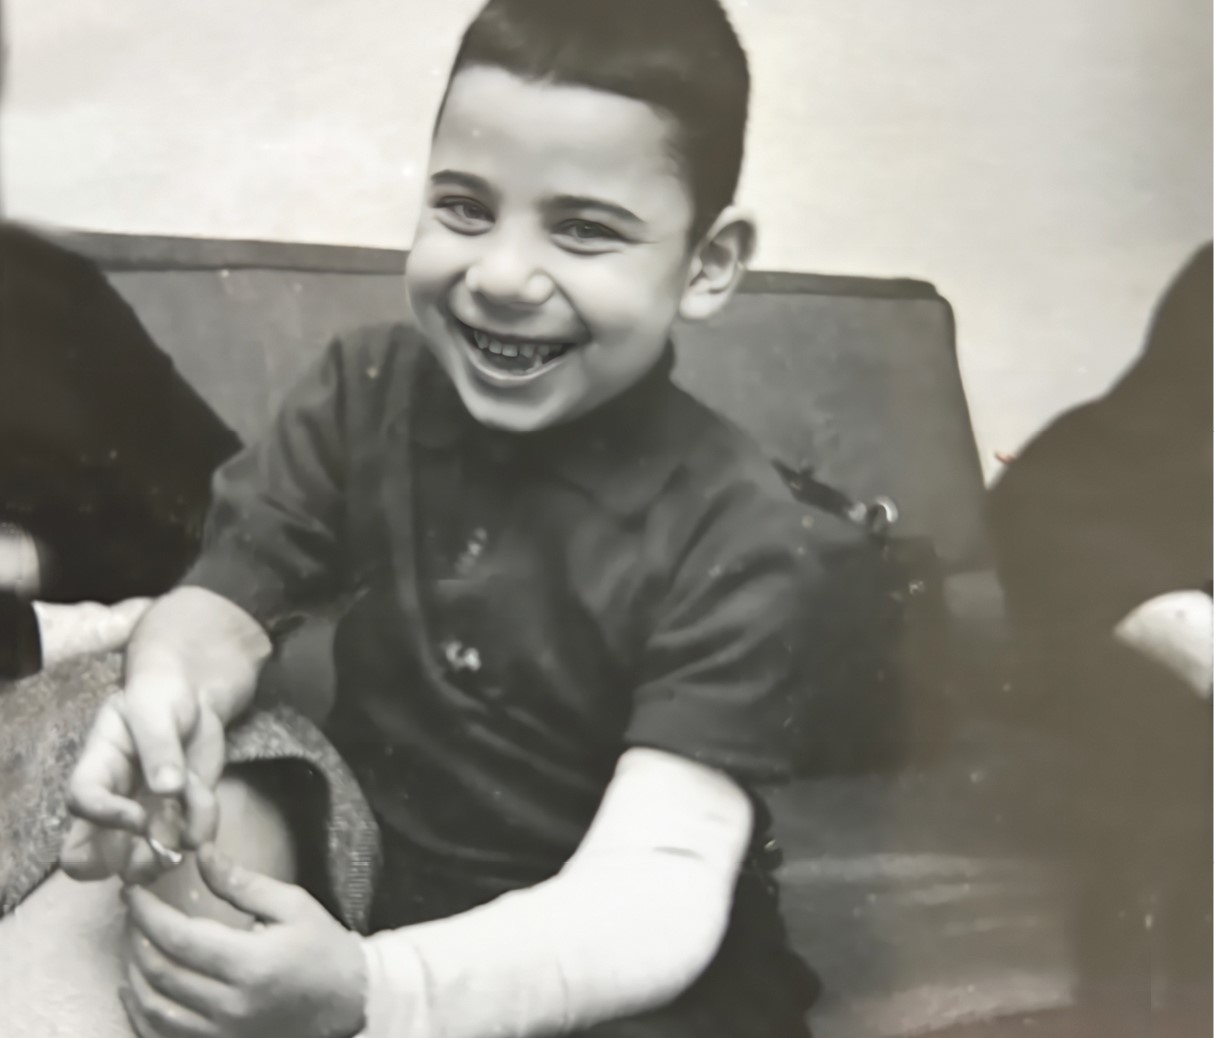 Dr. Eric Winer as a young child, with an elbow splint.